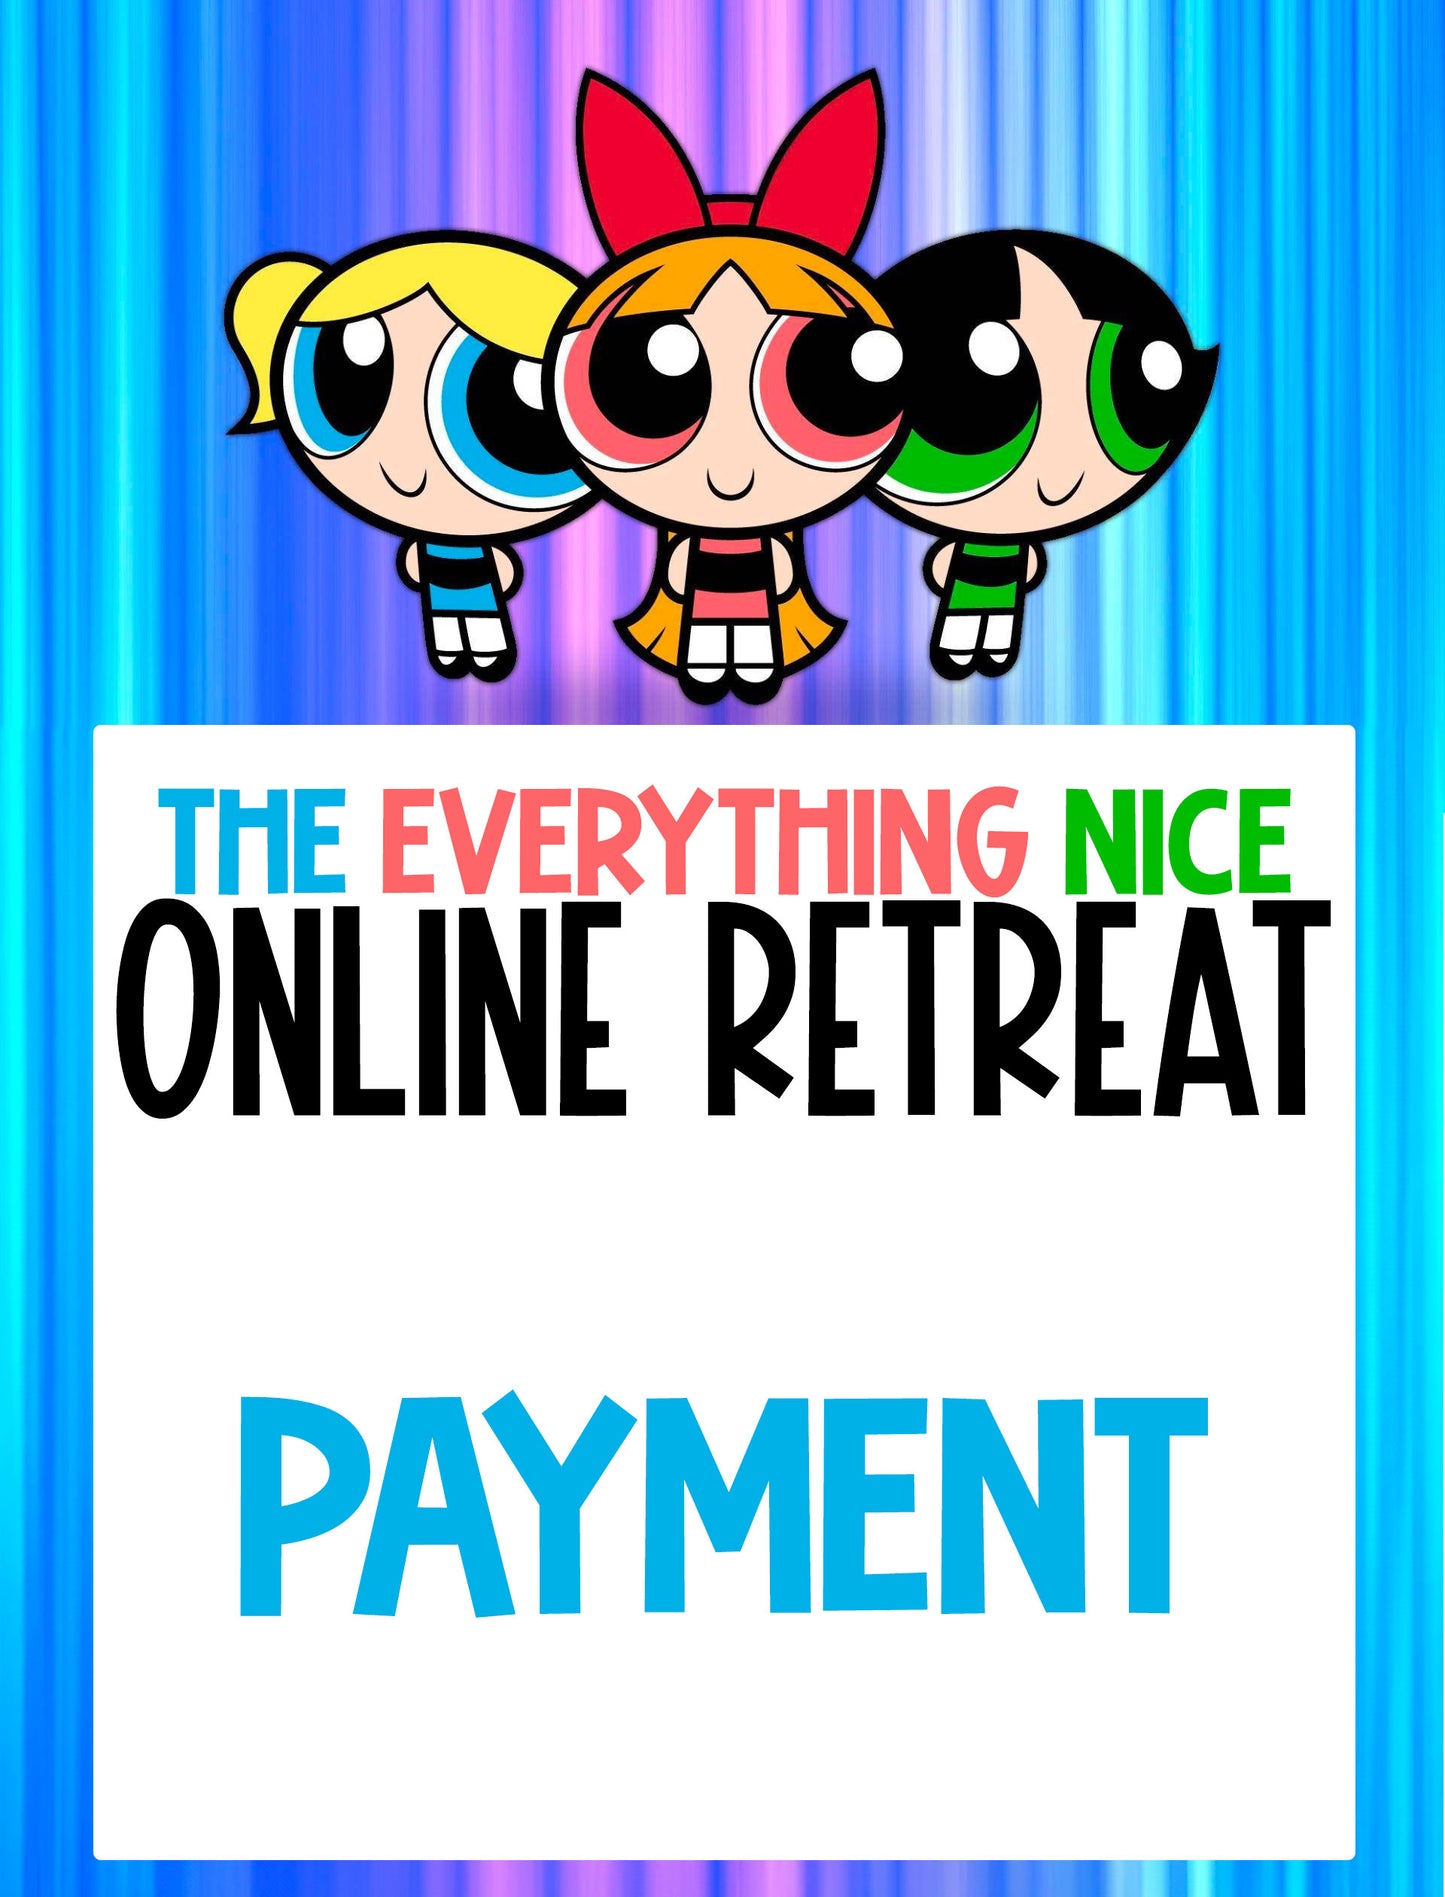 The Everything Nice Online retreat - Payment